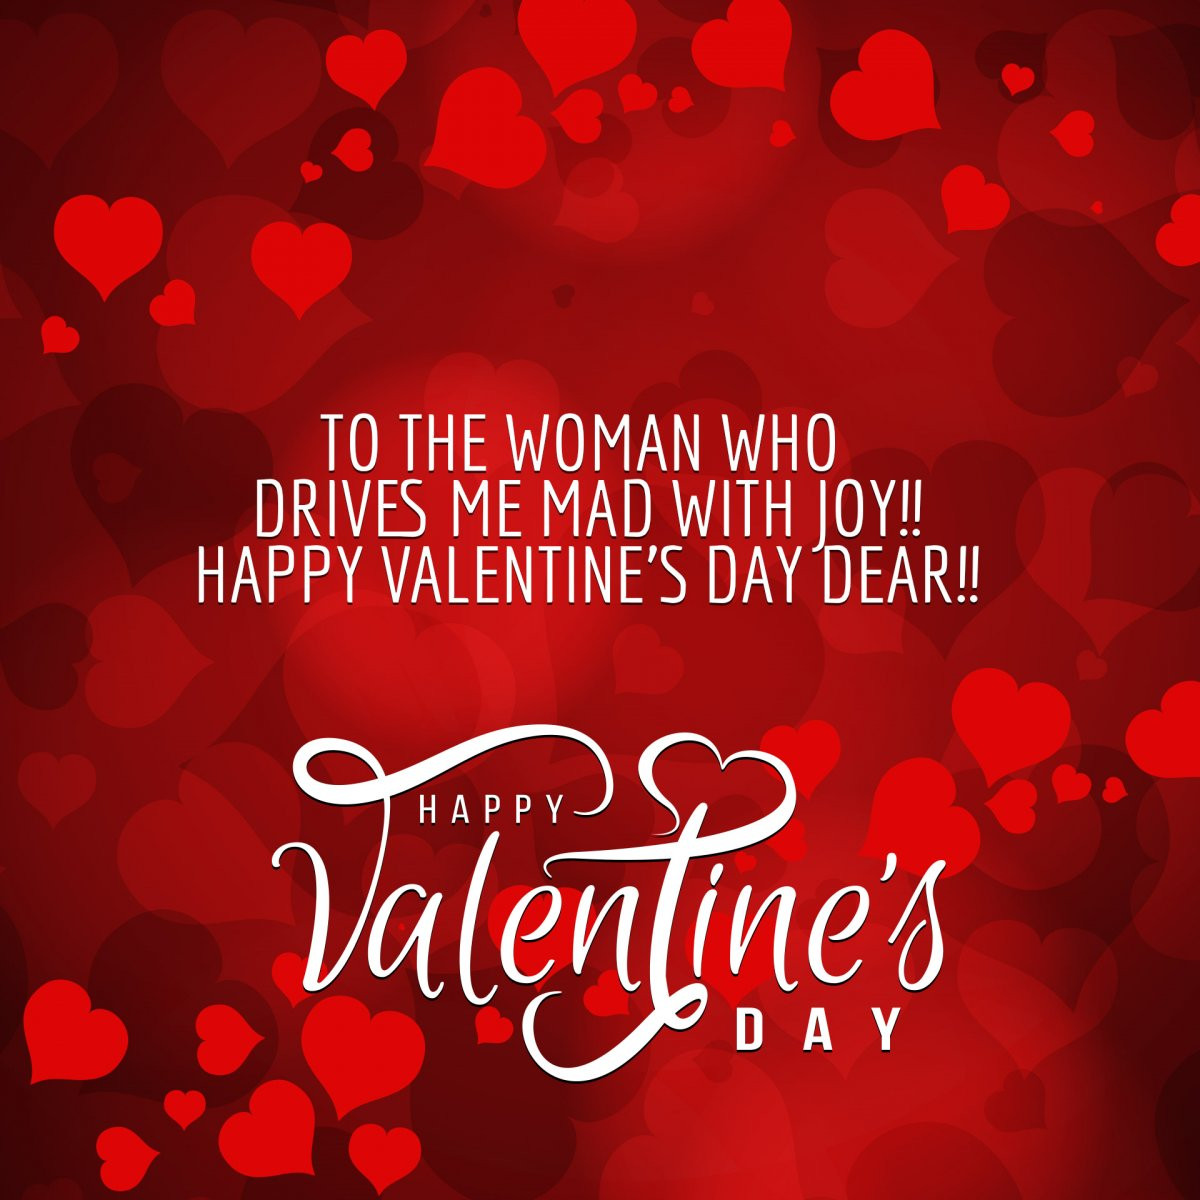 Quote For Valentines Day
 Cute Happy Valentine’s Day 2019 Wishes Messages and Love